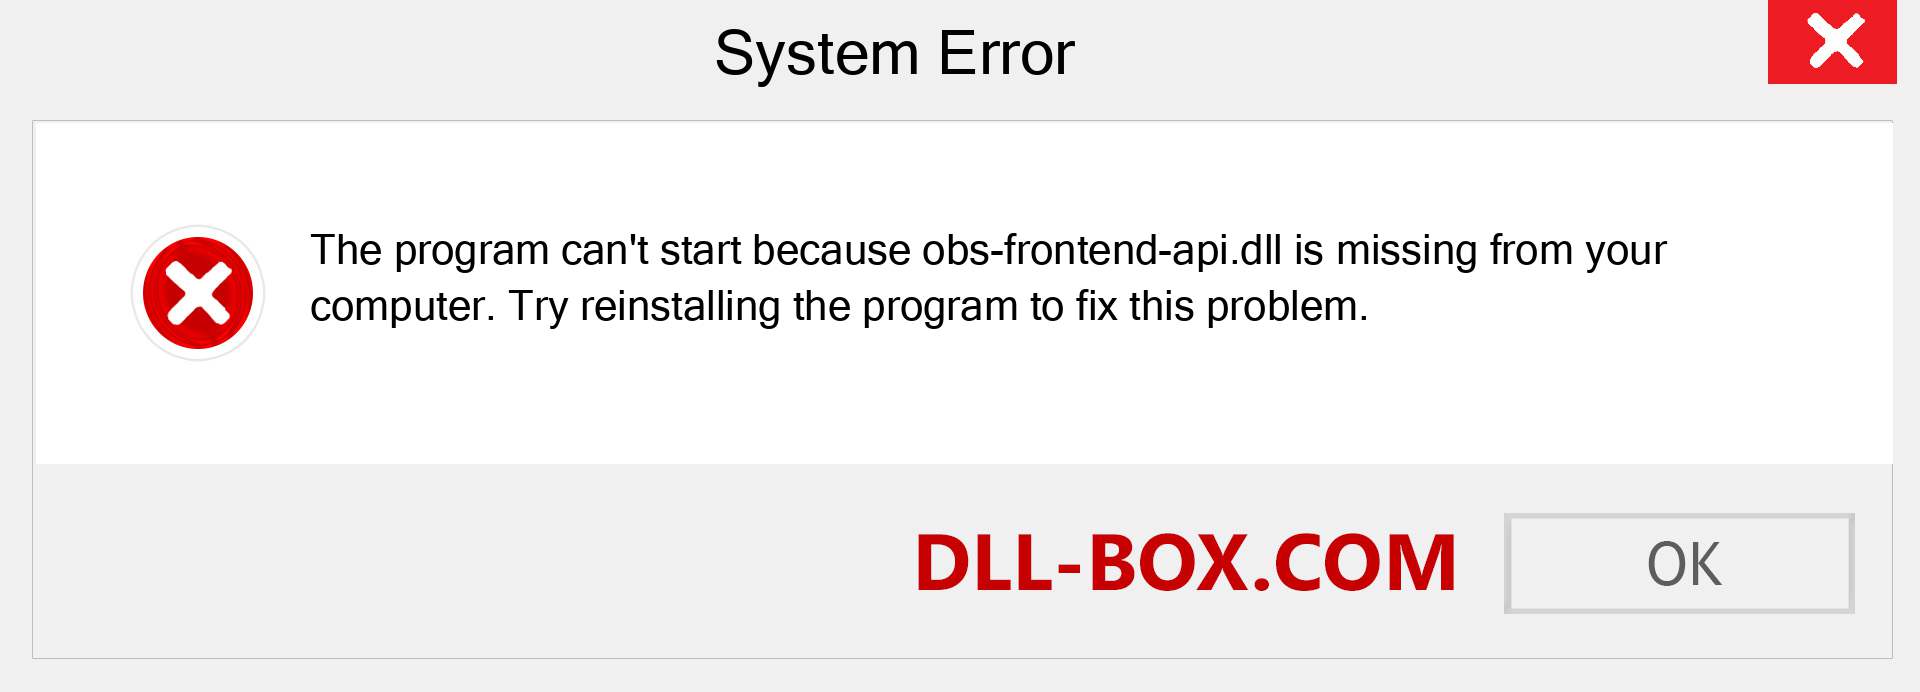  obs-frontend-api.dll file is missing?. Download for Windows 7, 8, 10 - Fix  obs-frontend-api dll Missing Error on Windows, photos, images